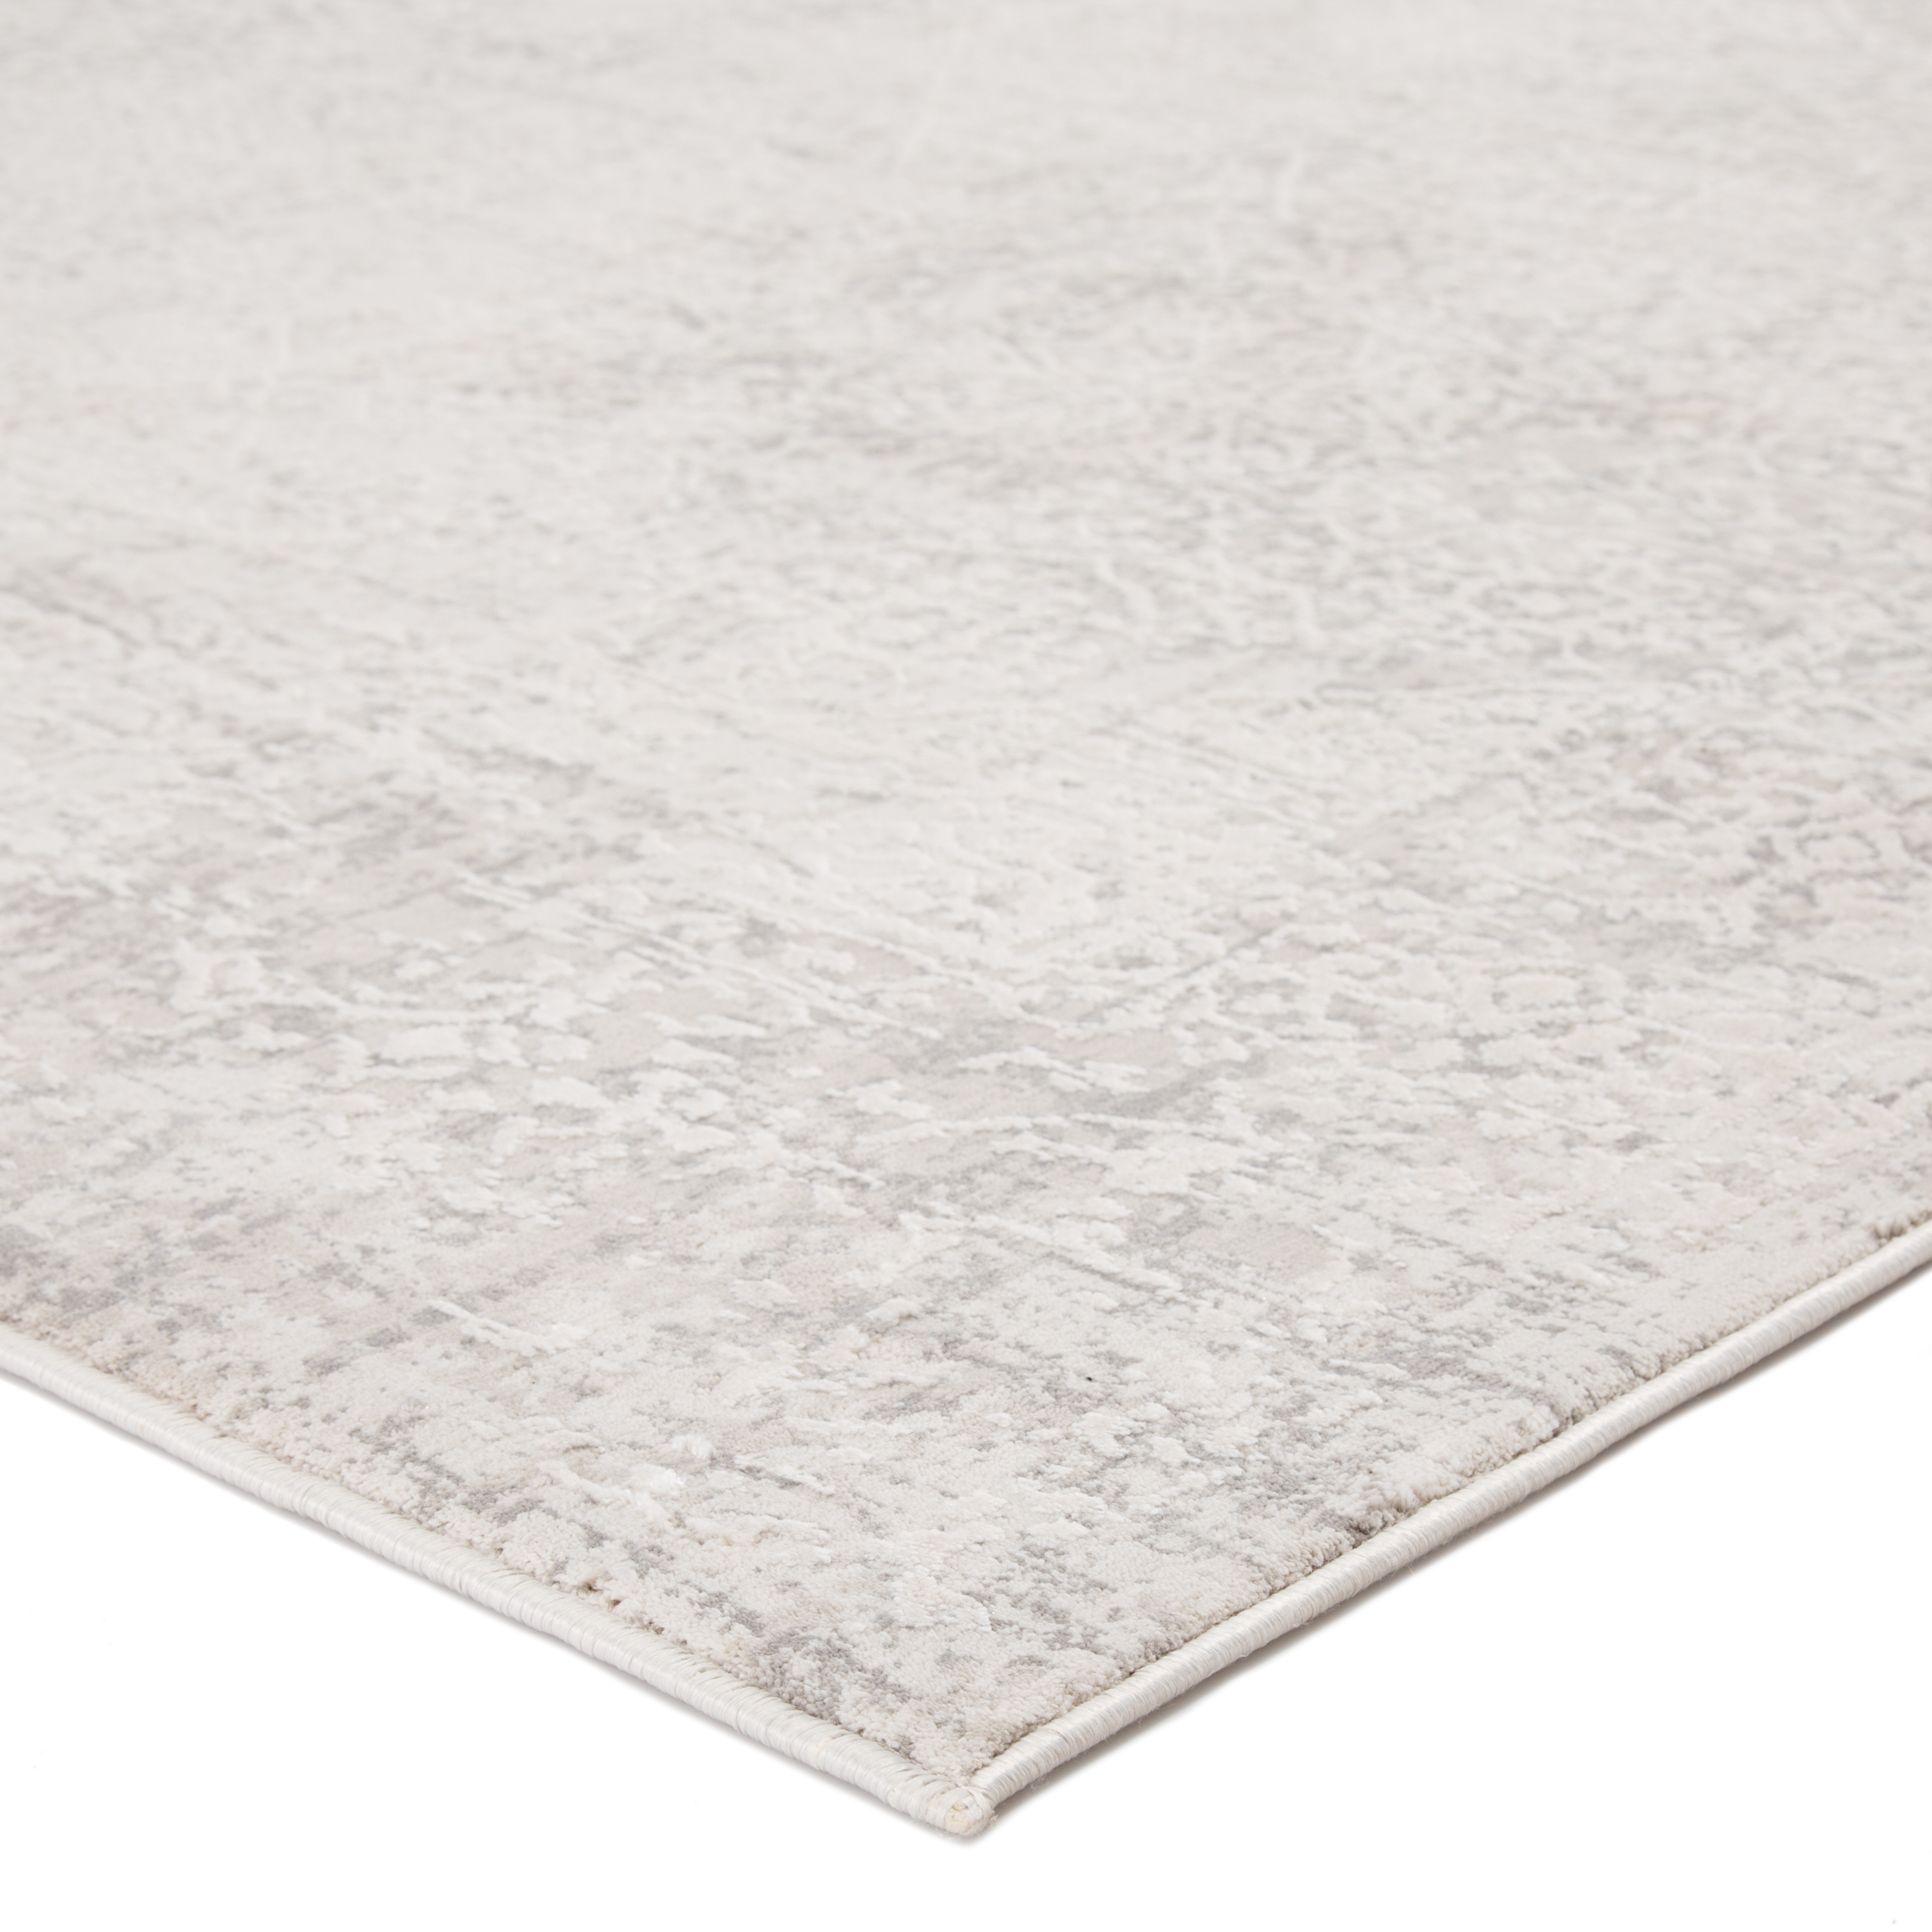 Lianna Abstract Silver/ White Area Rug (5' X 7'6") - Image 1